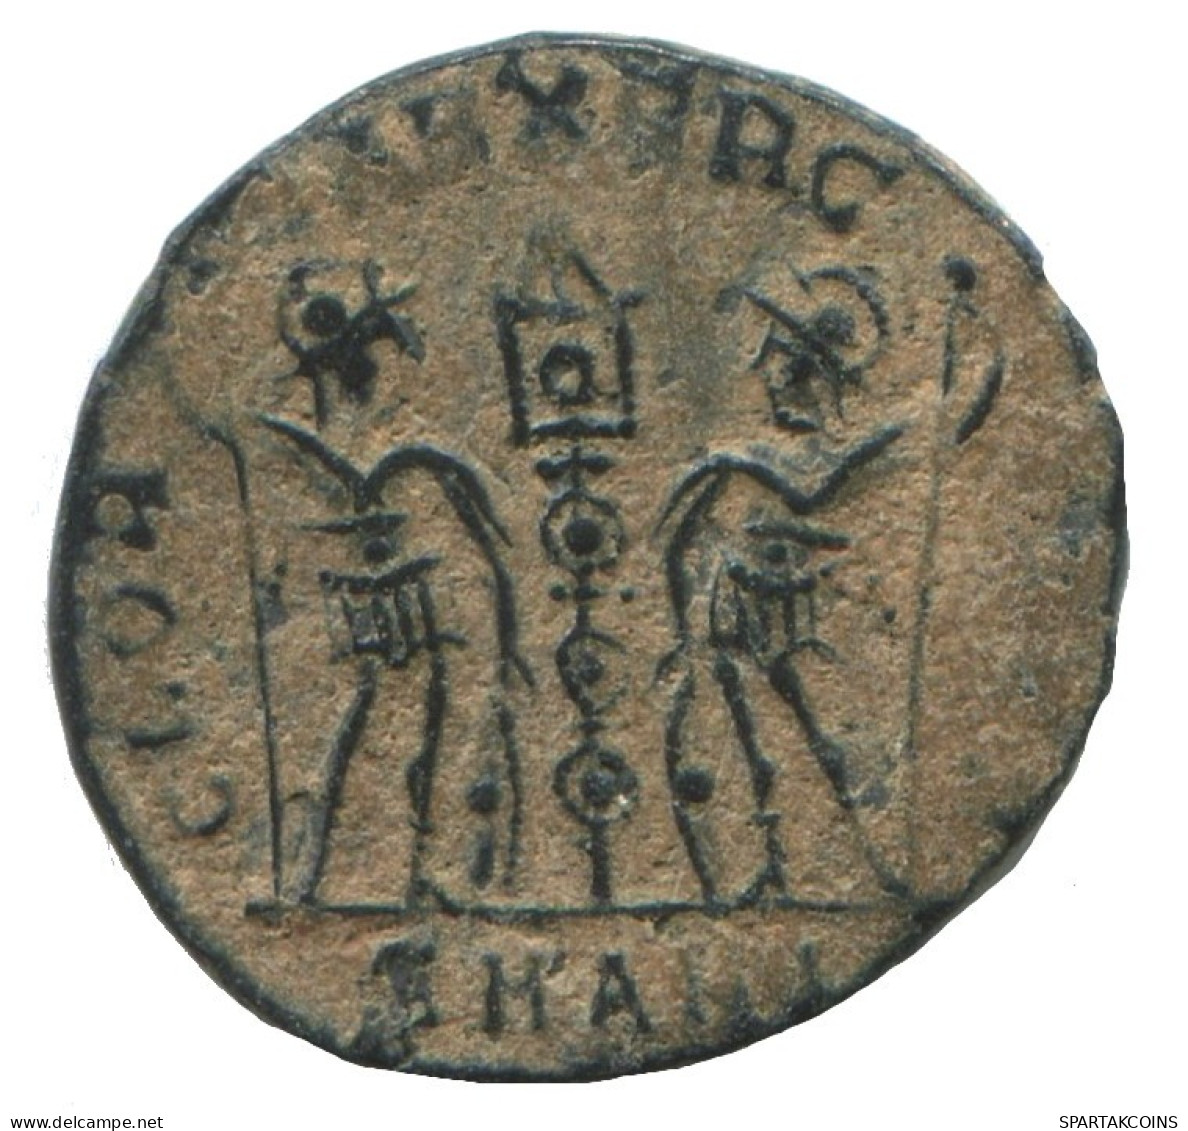 CONSTANS ANTIOCH SMAN AD348 GLORIA EXERCITVS TWO SOLDIERS 1g/16m #ANN1467.10.F.A - The Christian Empire (307 AD To 363 AD)